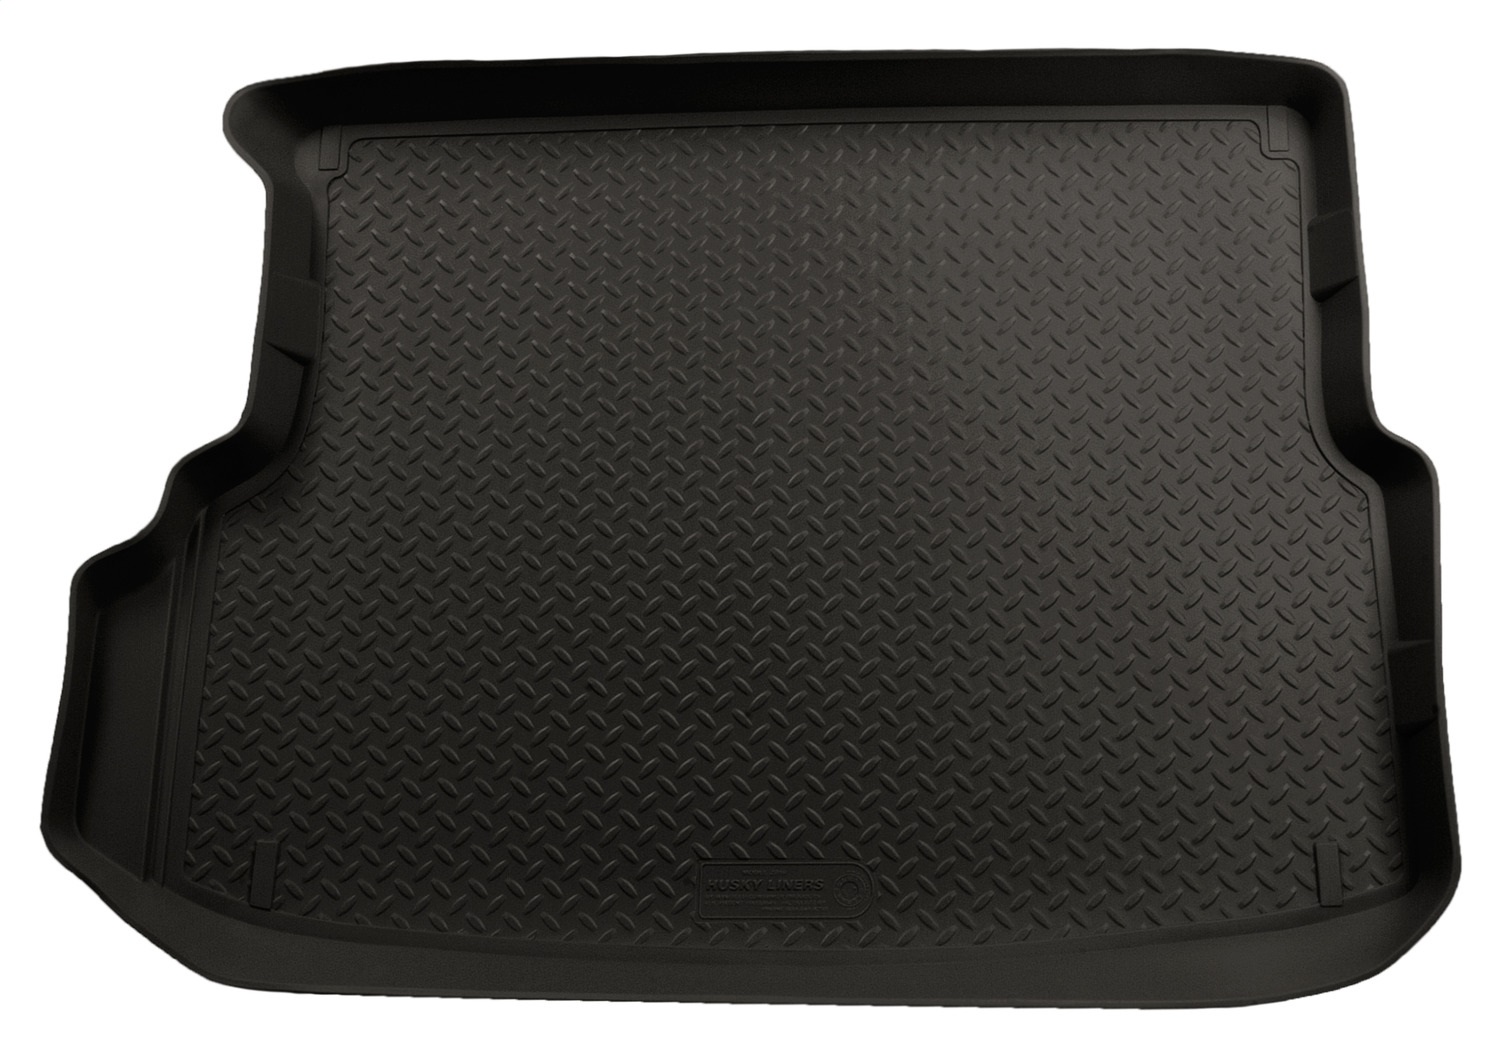 Husky Liners Husky Liners 23161 Classic Style; Cargo Liner Fits 08-12 Escape Mariner Tribute